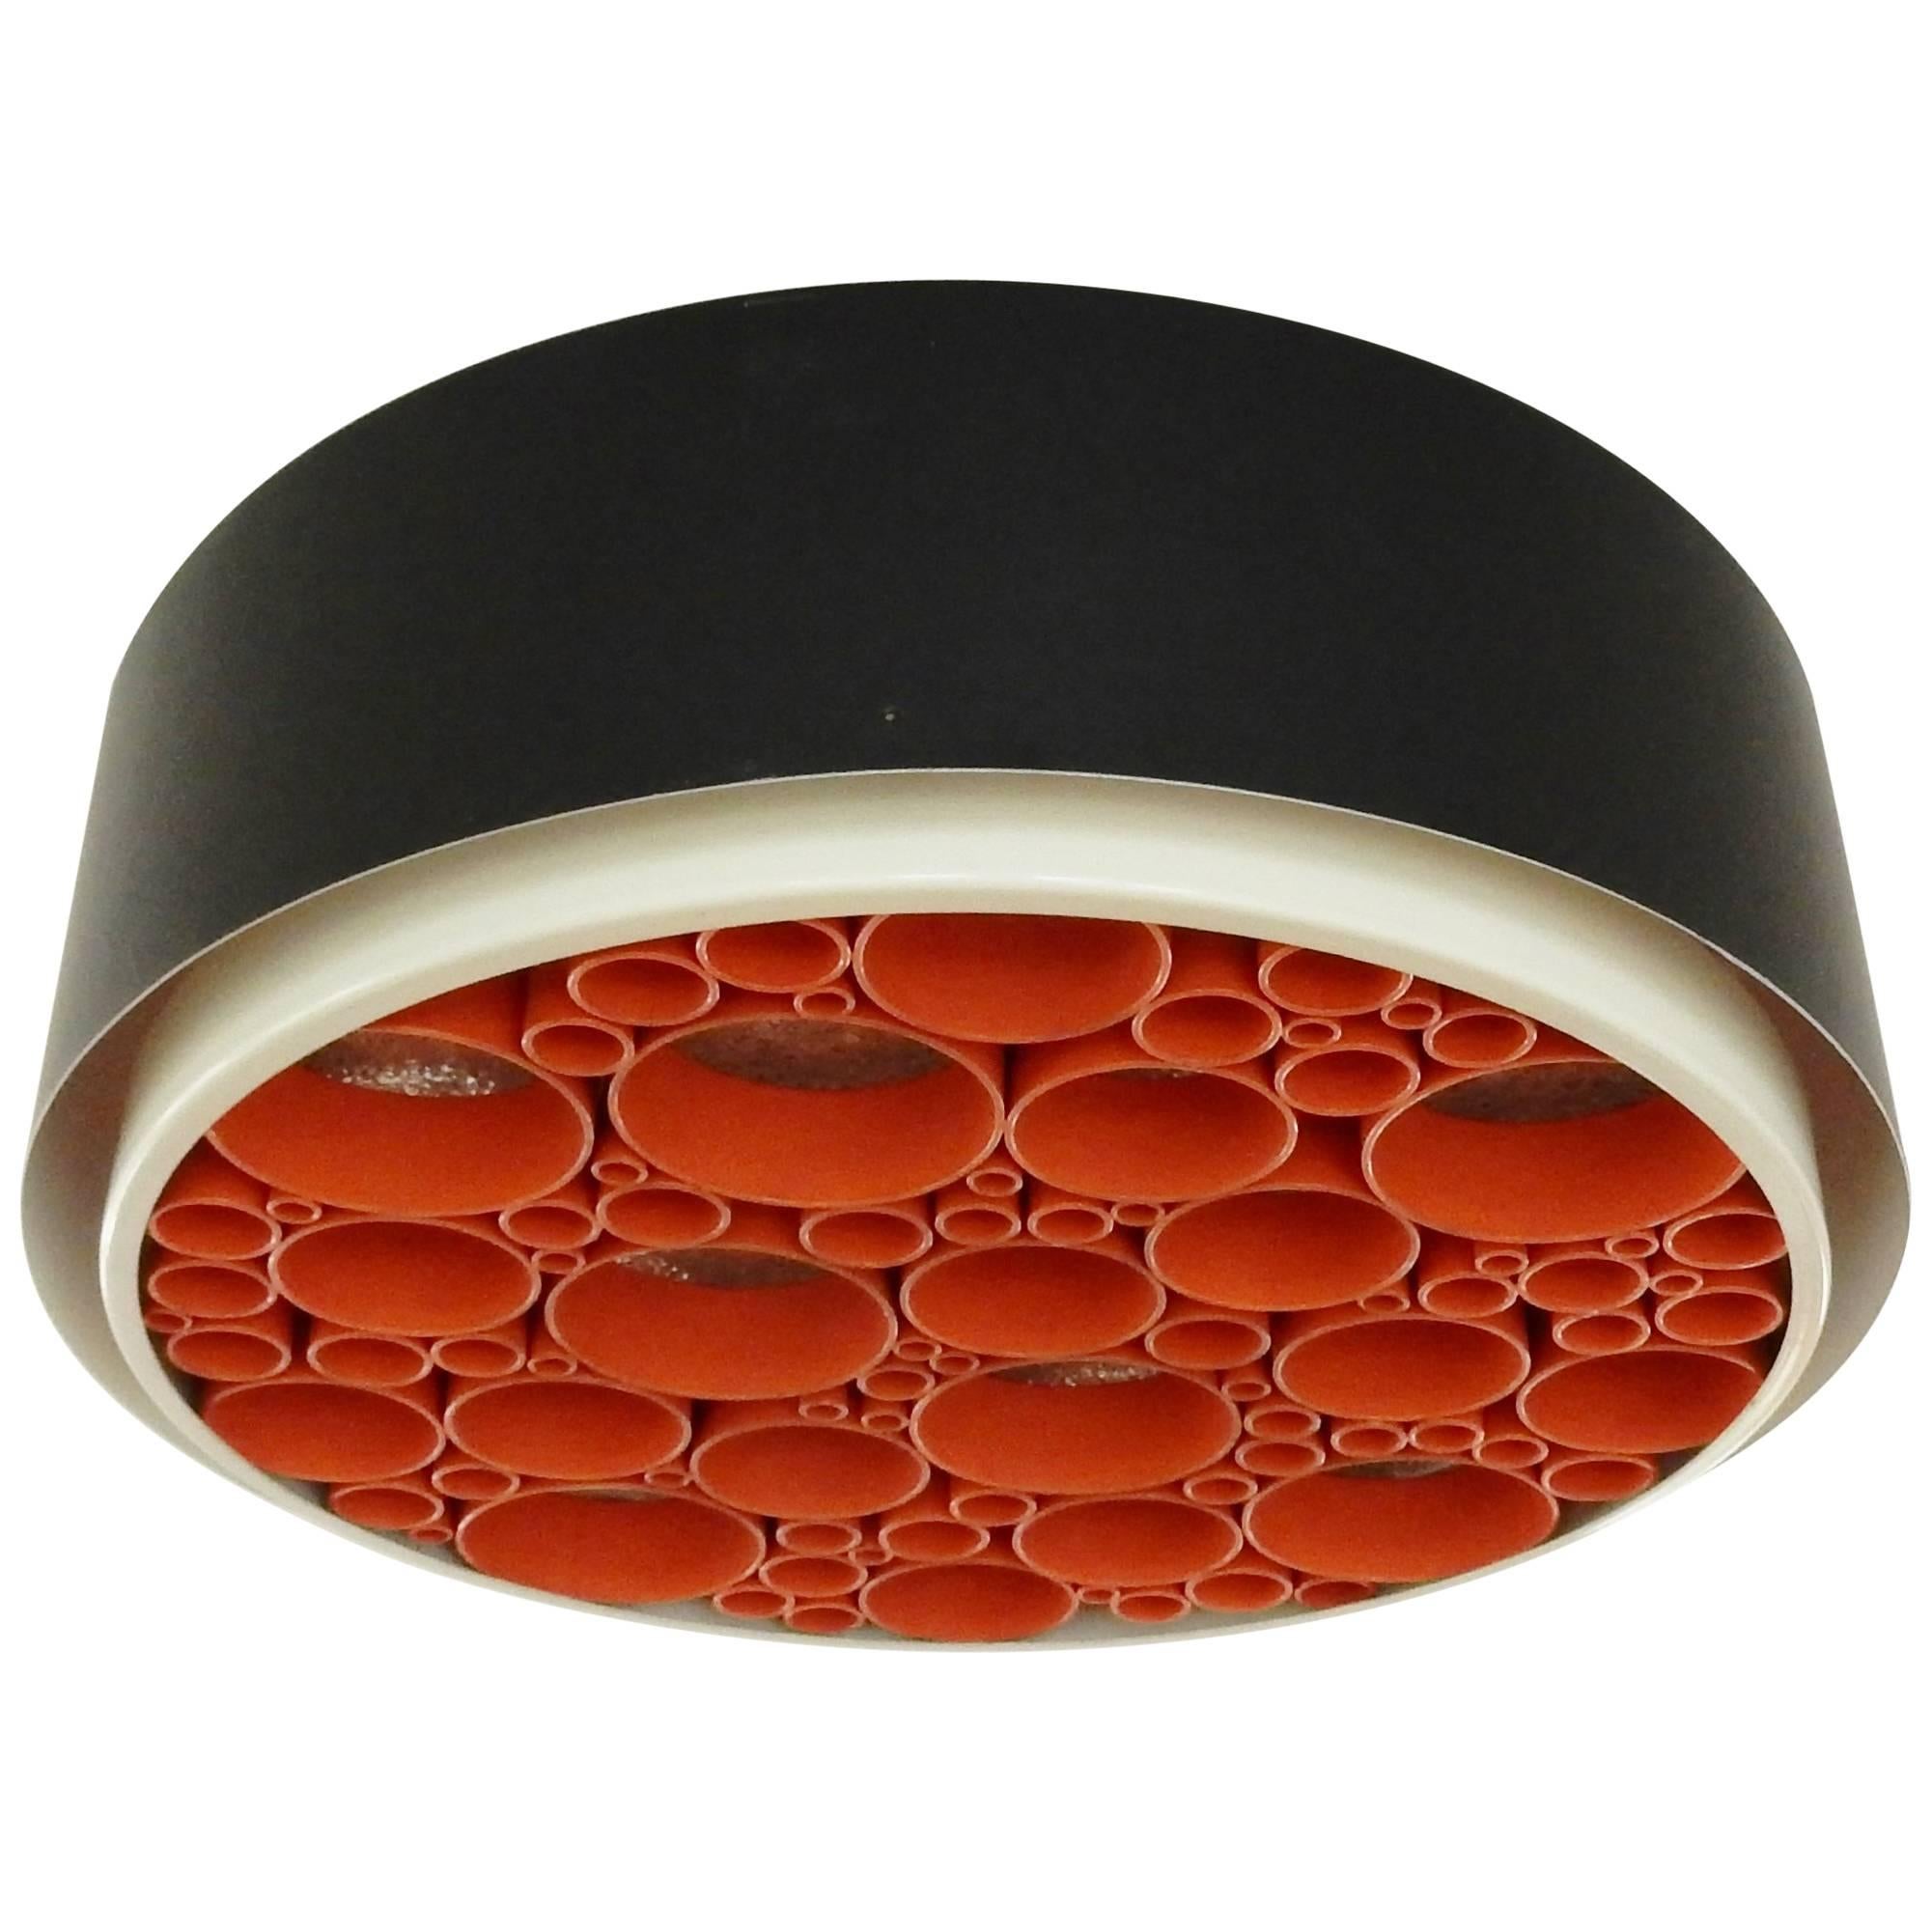 Model 'Alliance' or 'P-1474' ceiling lamp by RAAK Amsterdam, Netherlands, 1970s